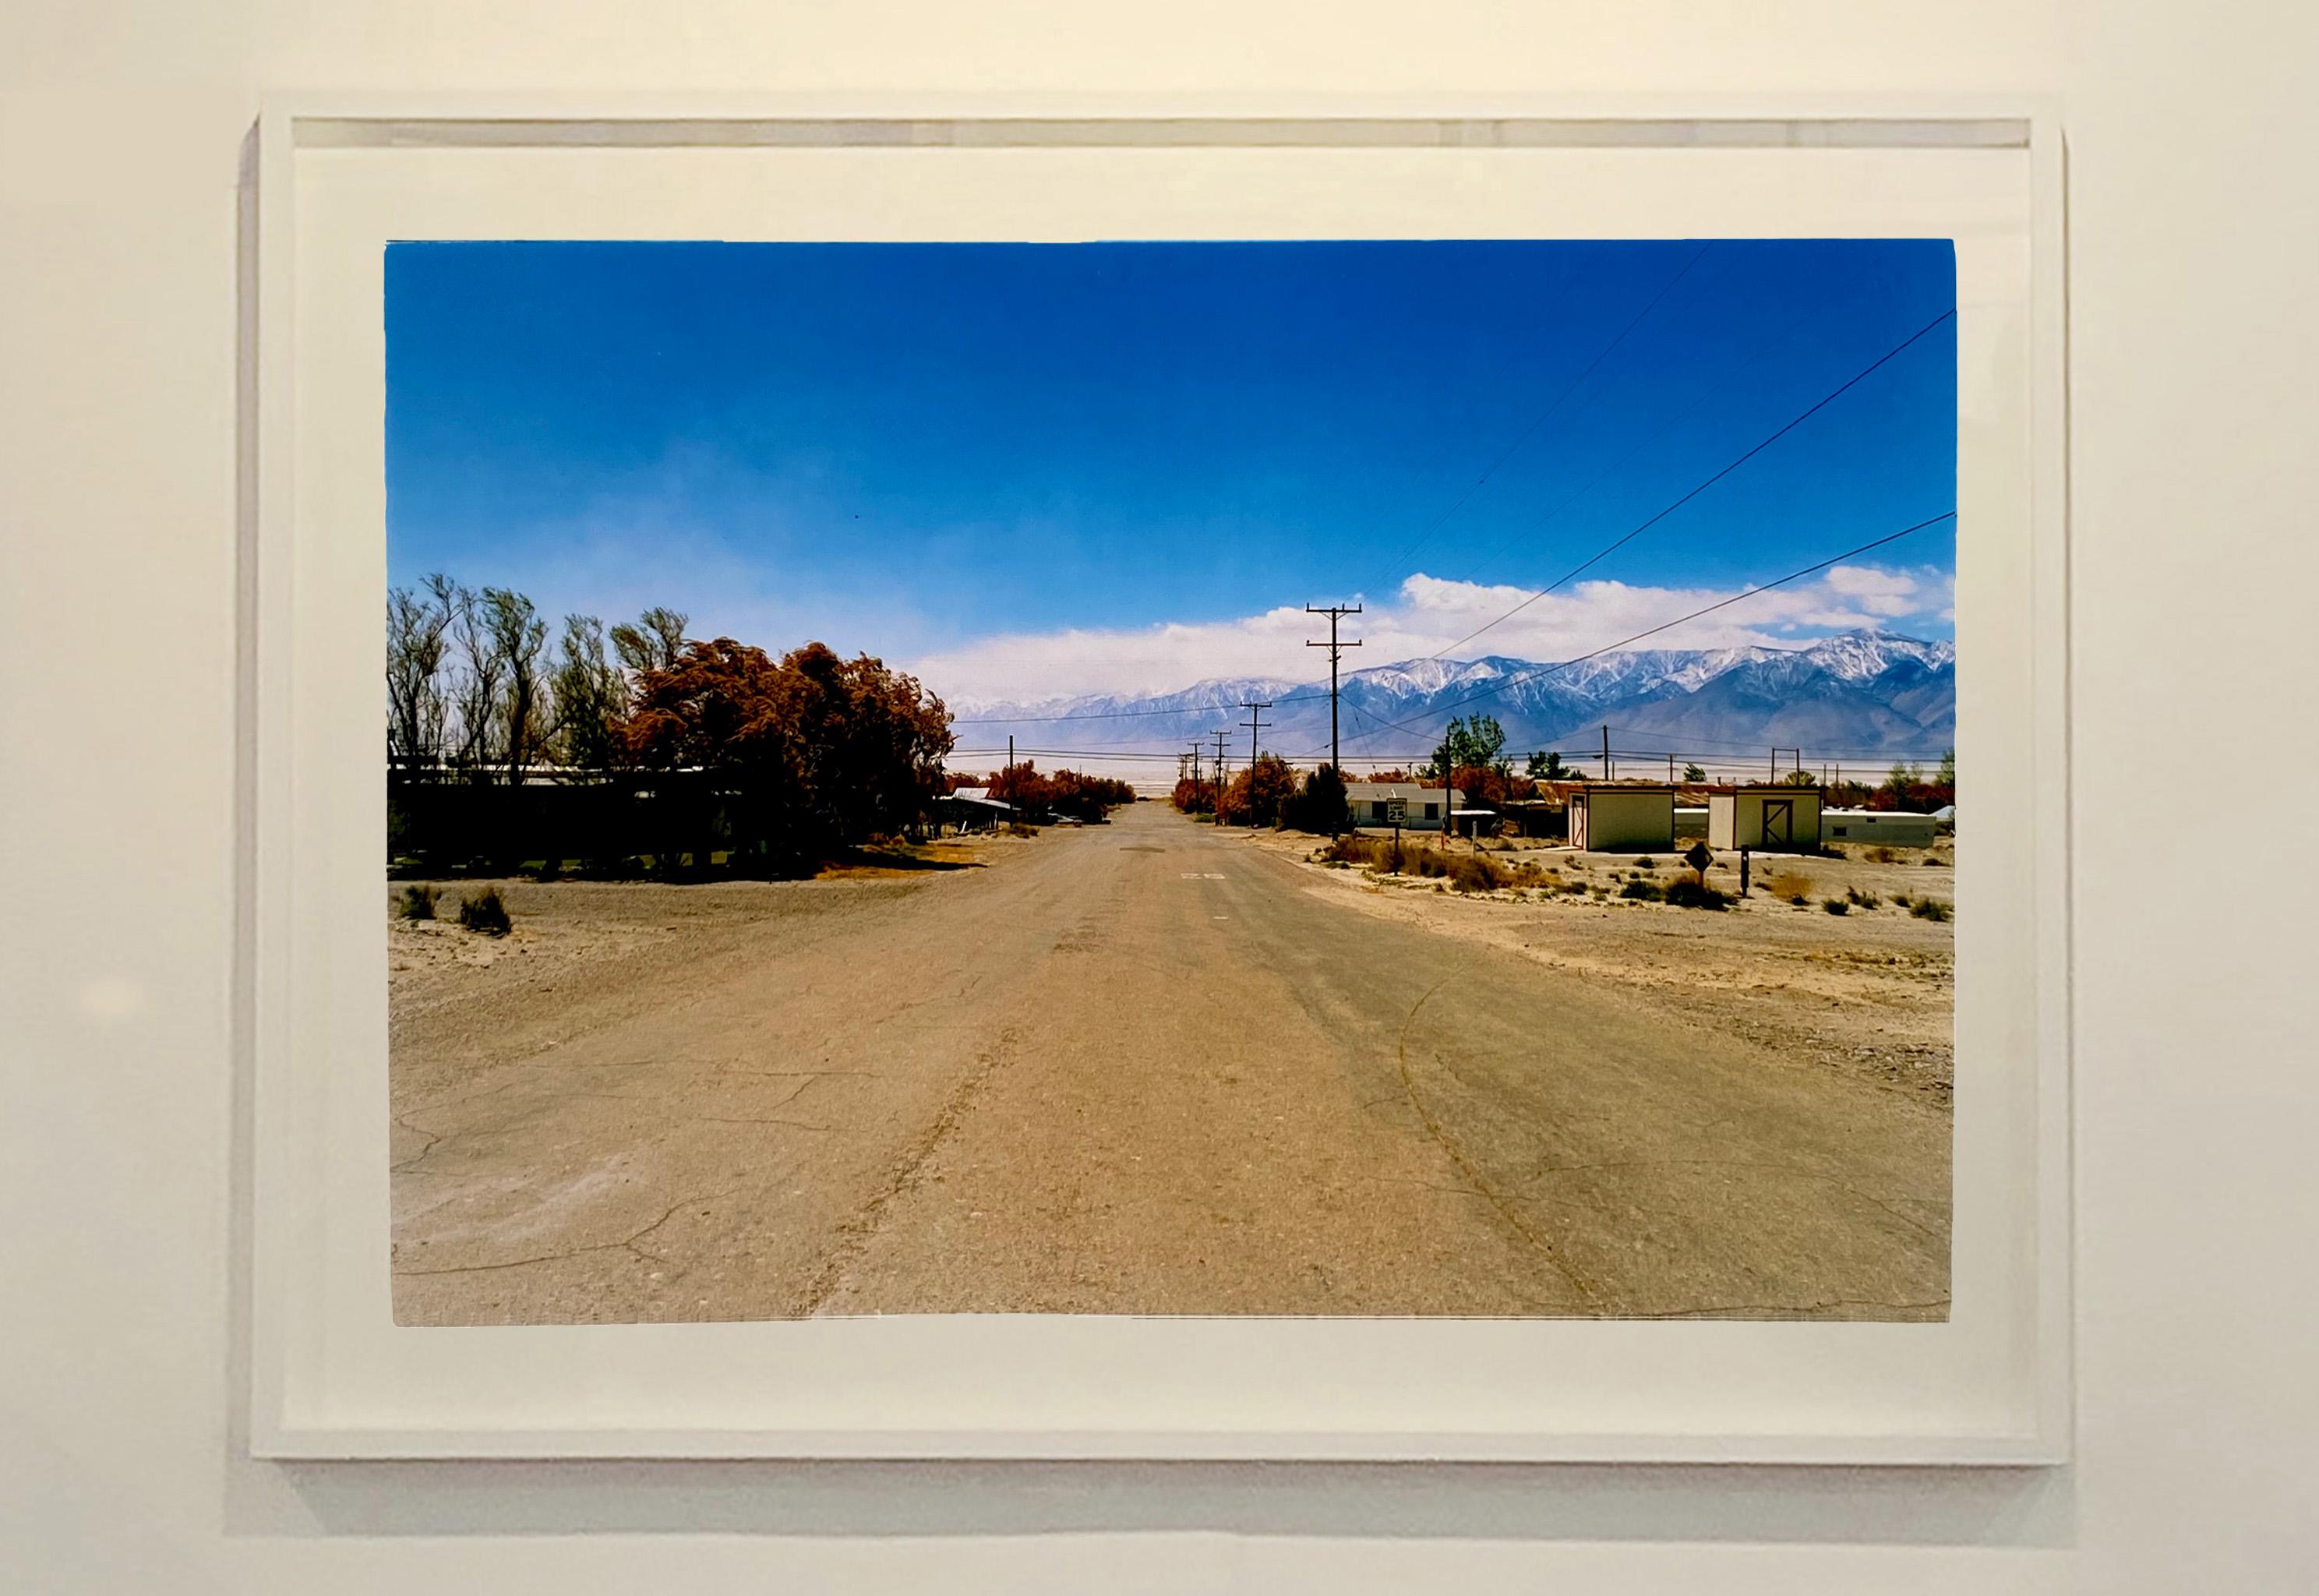 'Malone Street', the American open road leading to snow capped mountains in Keeler, California. This artwork is part of Richard Heeps' 'Dream in Colour' series.

This artwork is a limited edition of 25 gloss photographic print from negative,